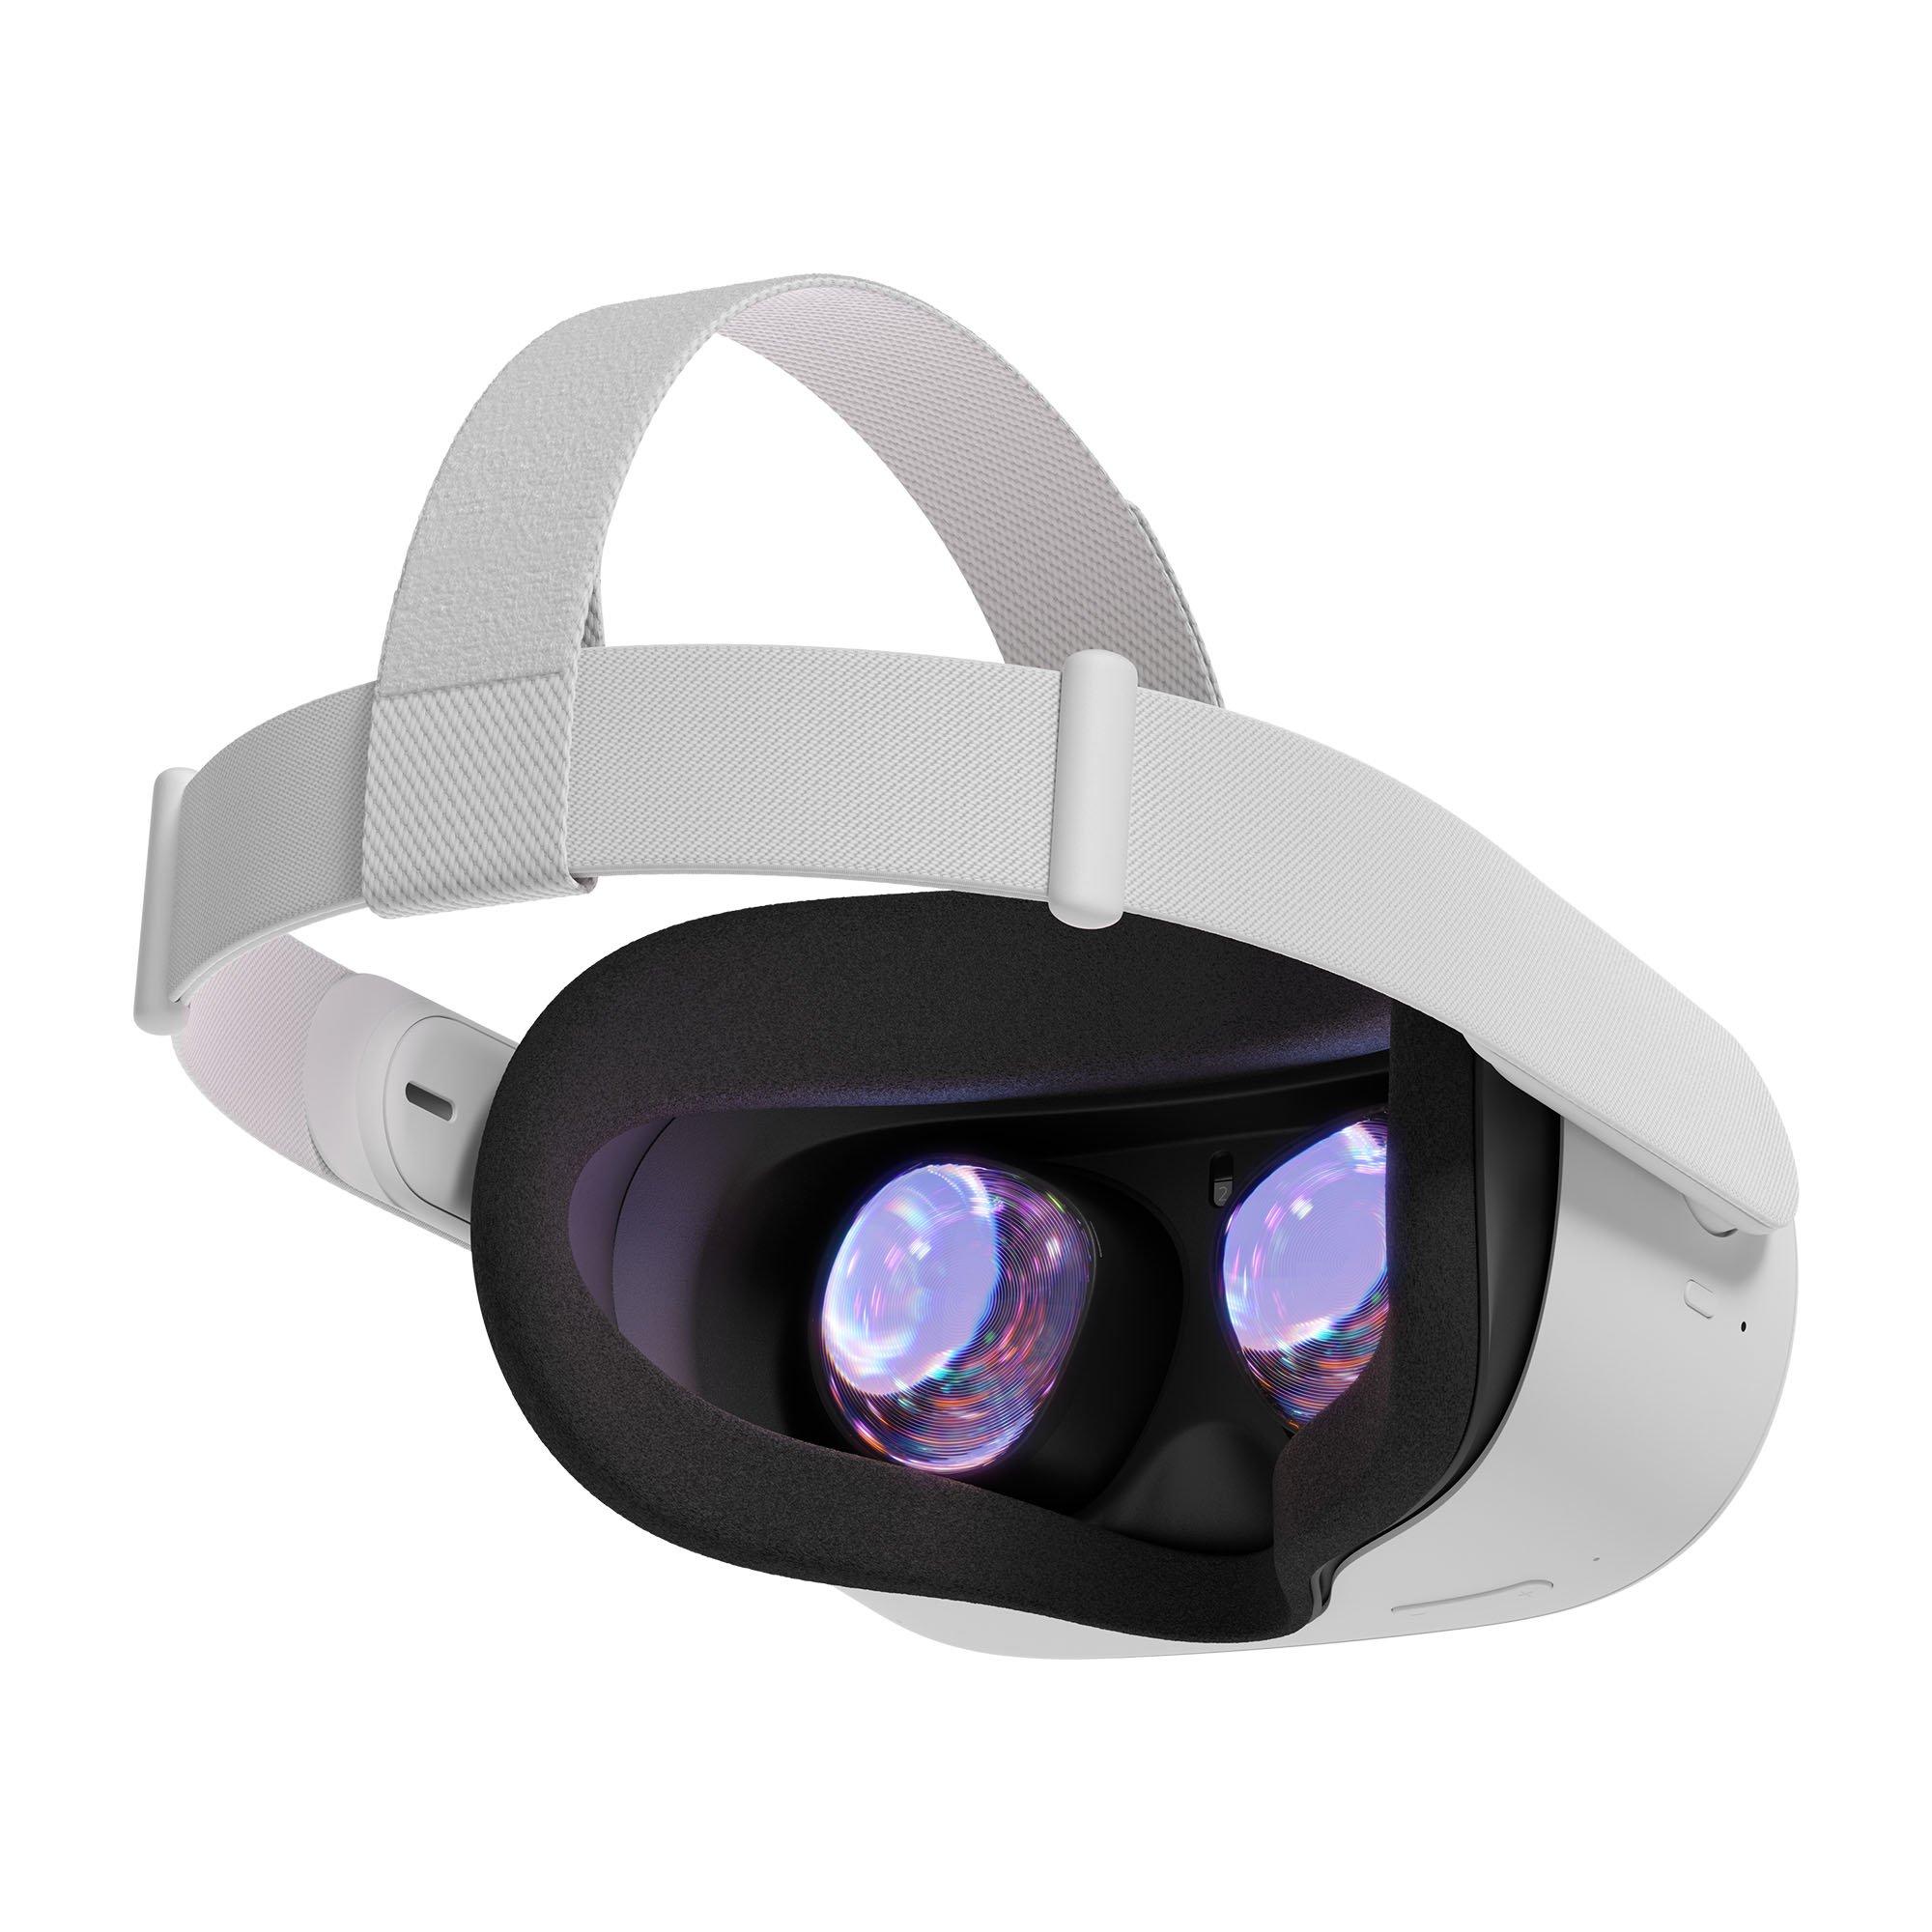 Meta Quest 2 - Advanced All-In-One Virtual Reality (VR) Headset